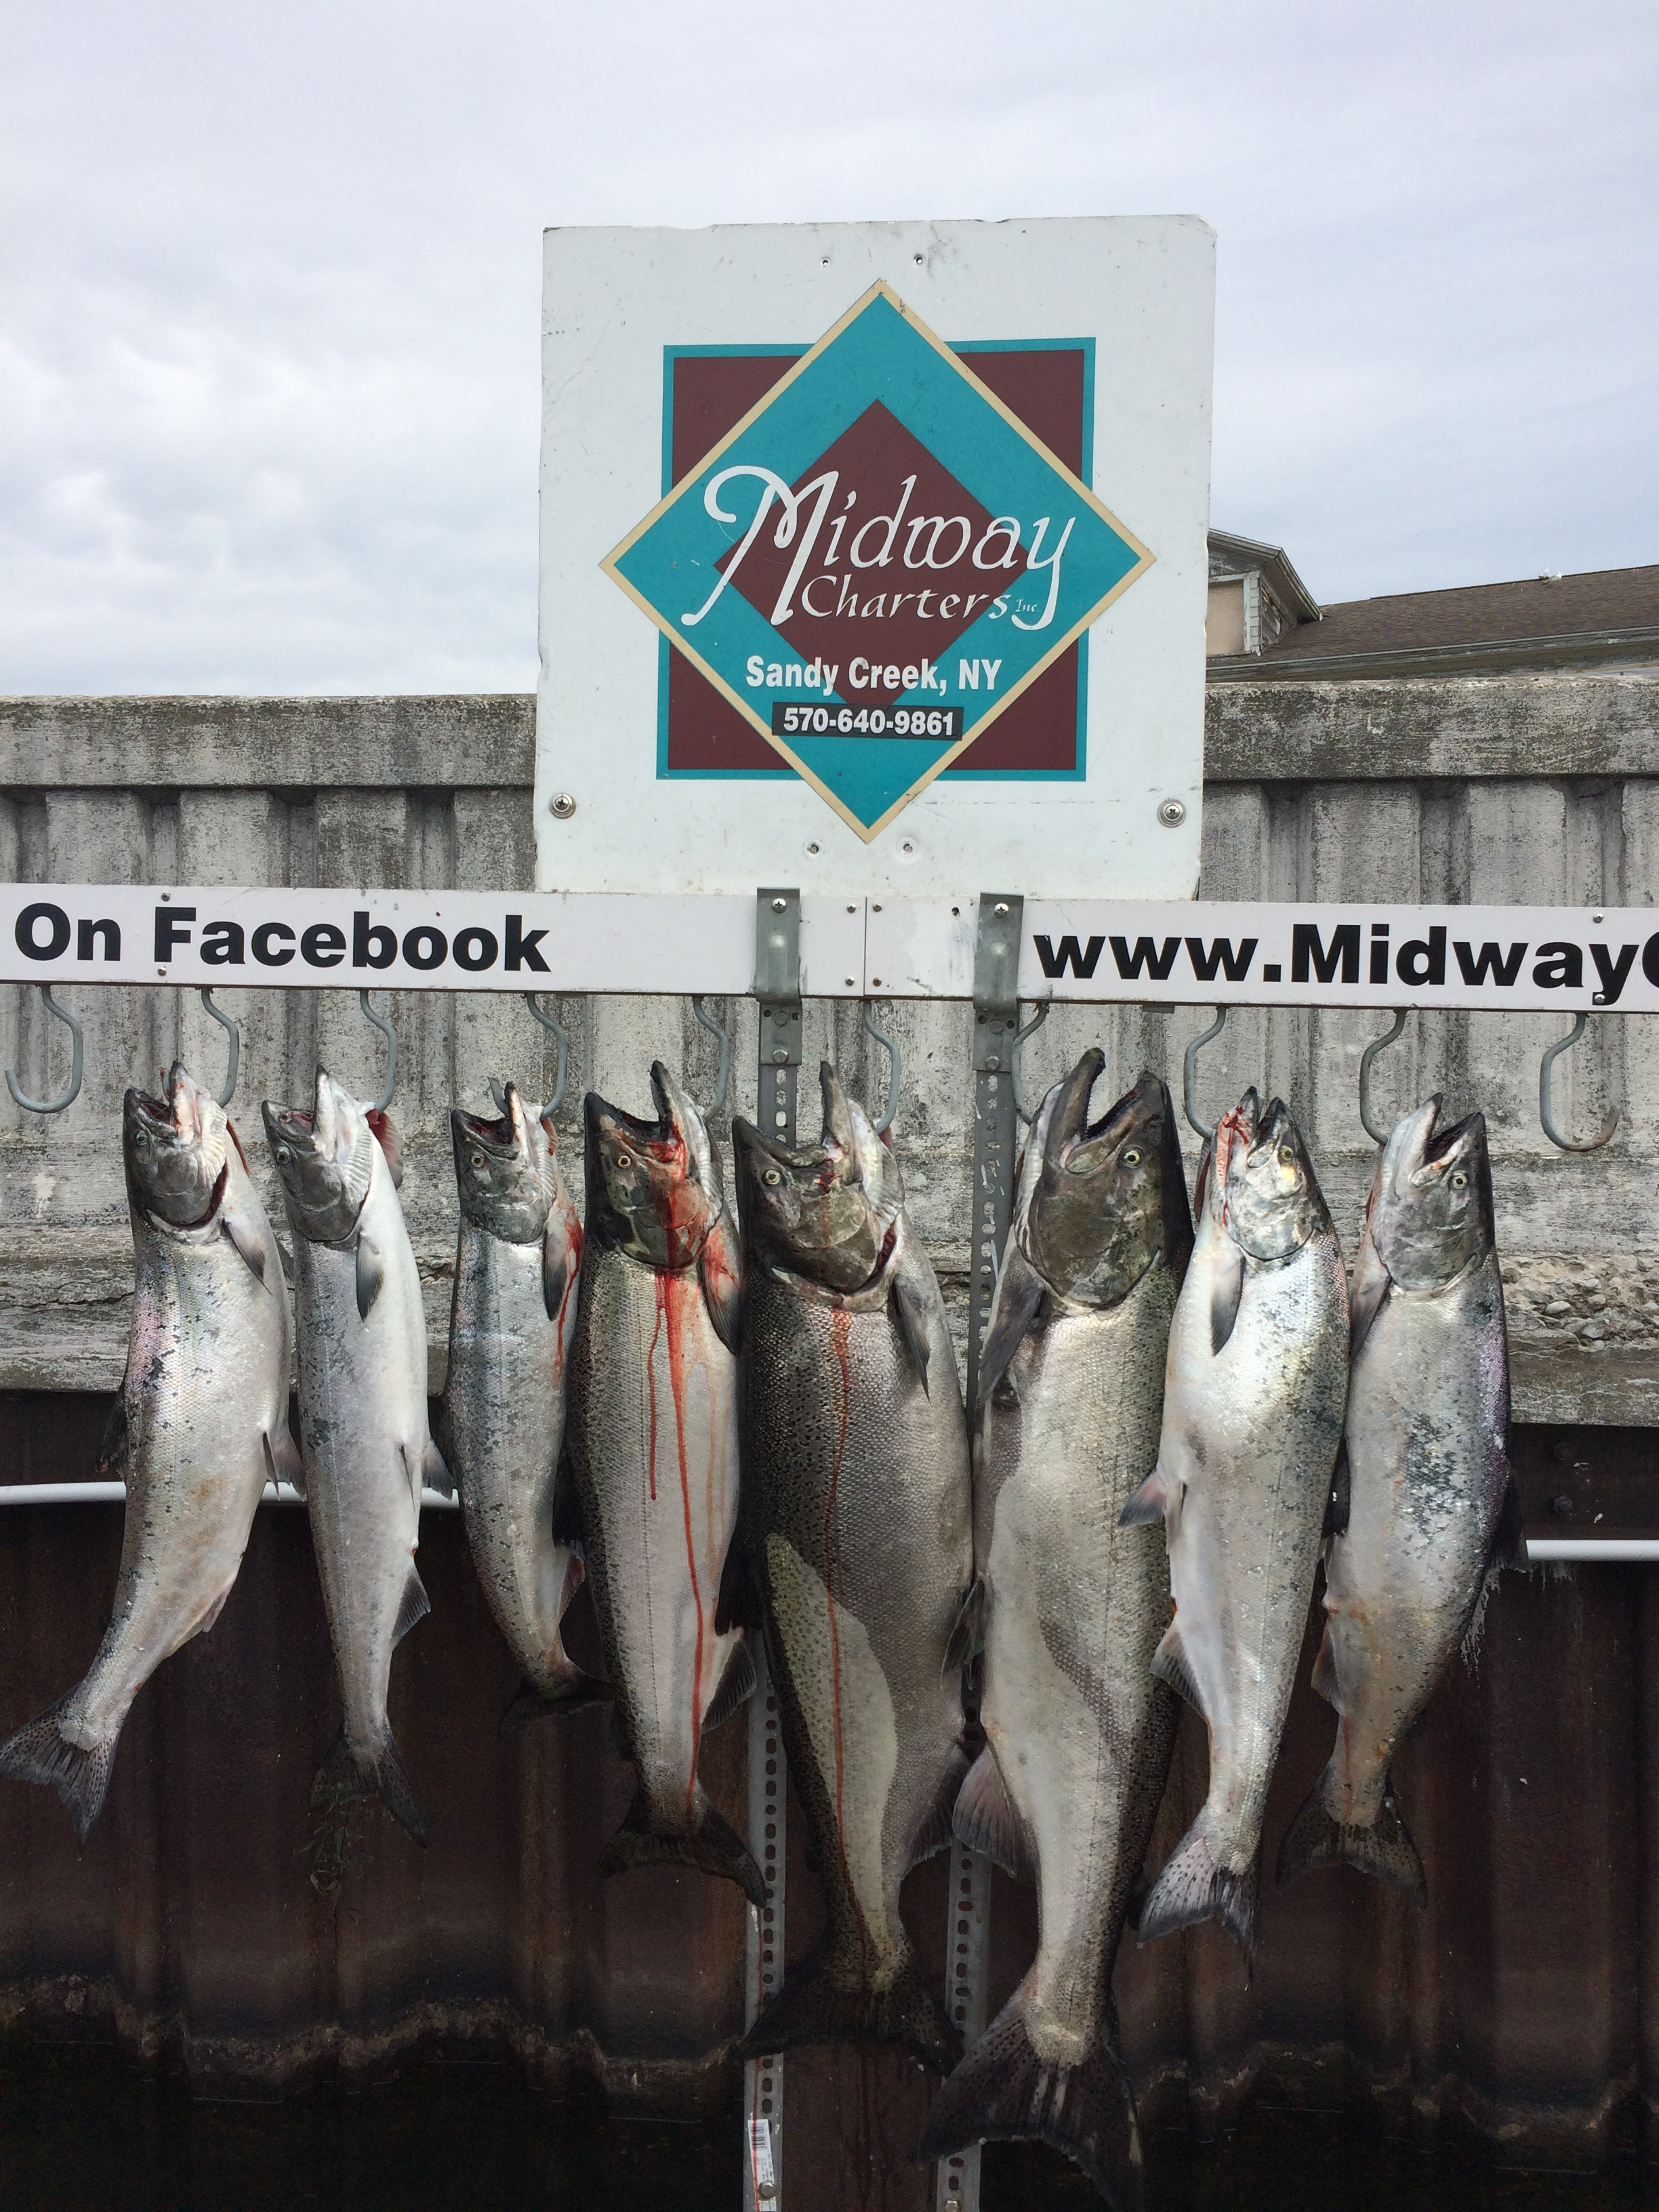 Midway Charters: 6 hour fishing trip